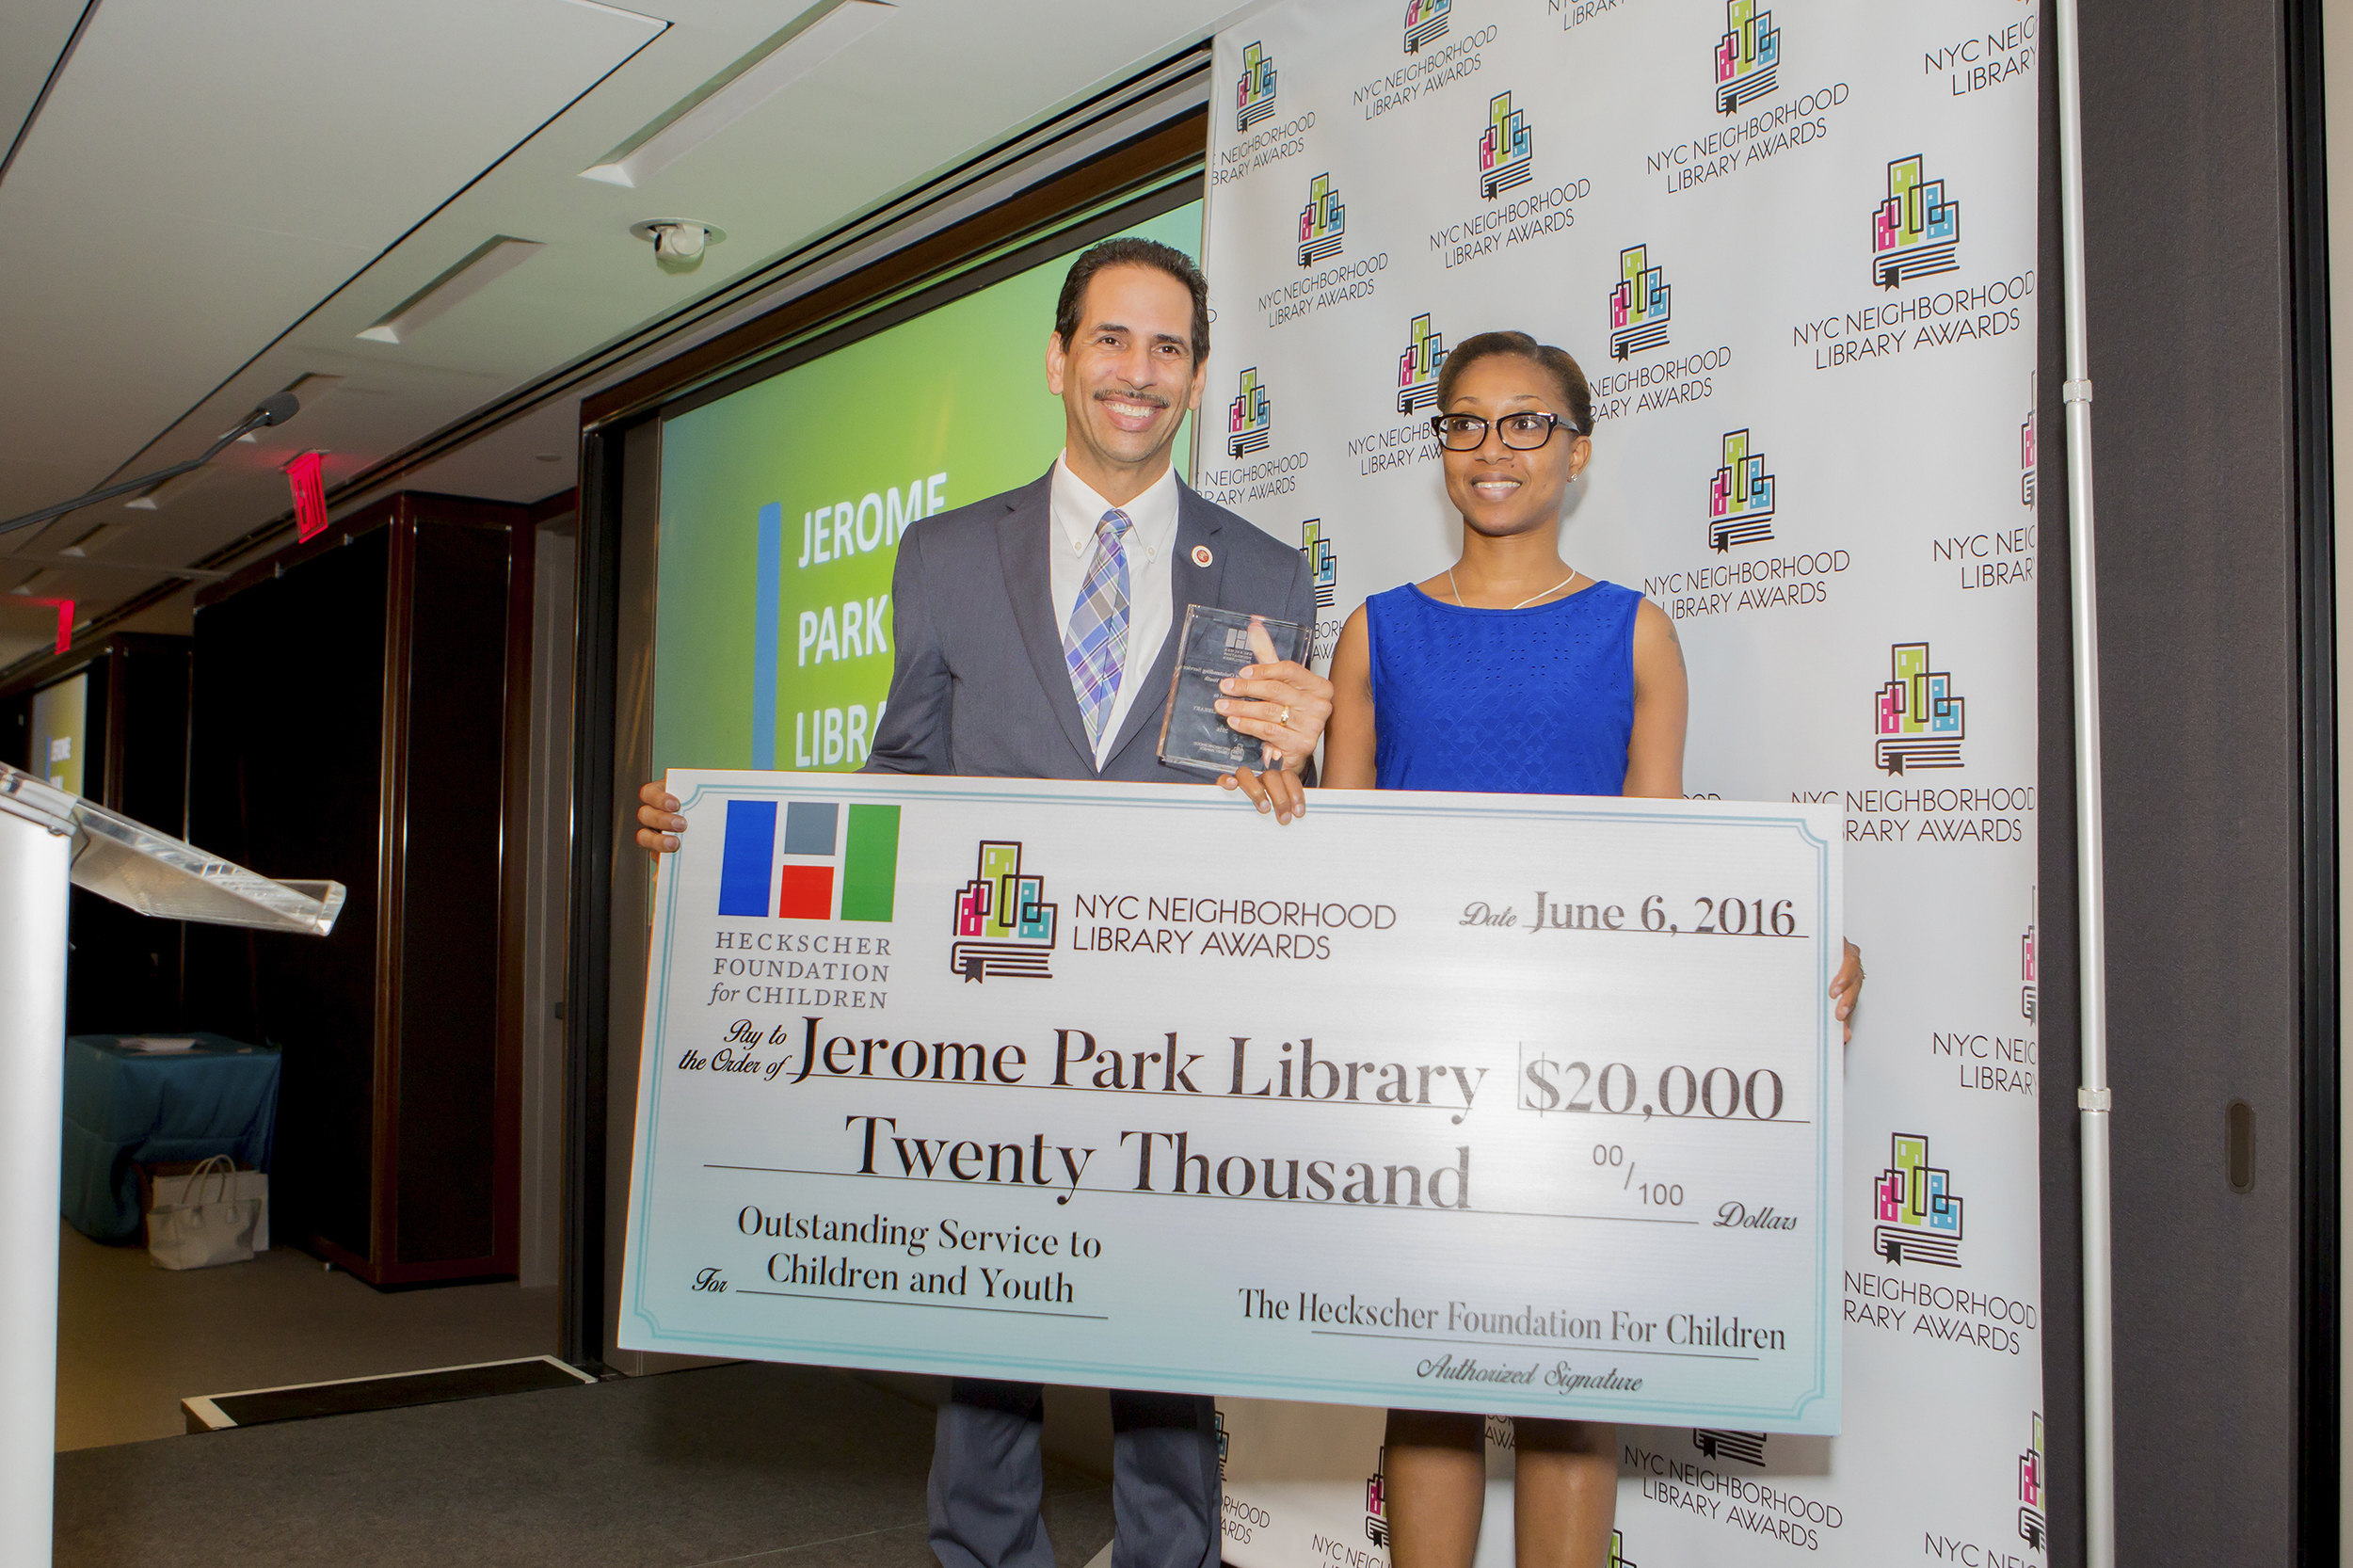 Council Member Fernando Cabrera presents the Heckscher Prize for Outstanding Service to Children and Youth to Nicola McDonald, Manager of the Jerome Park Library